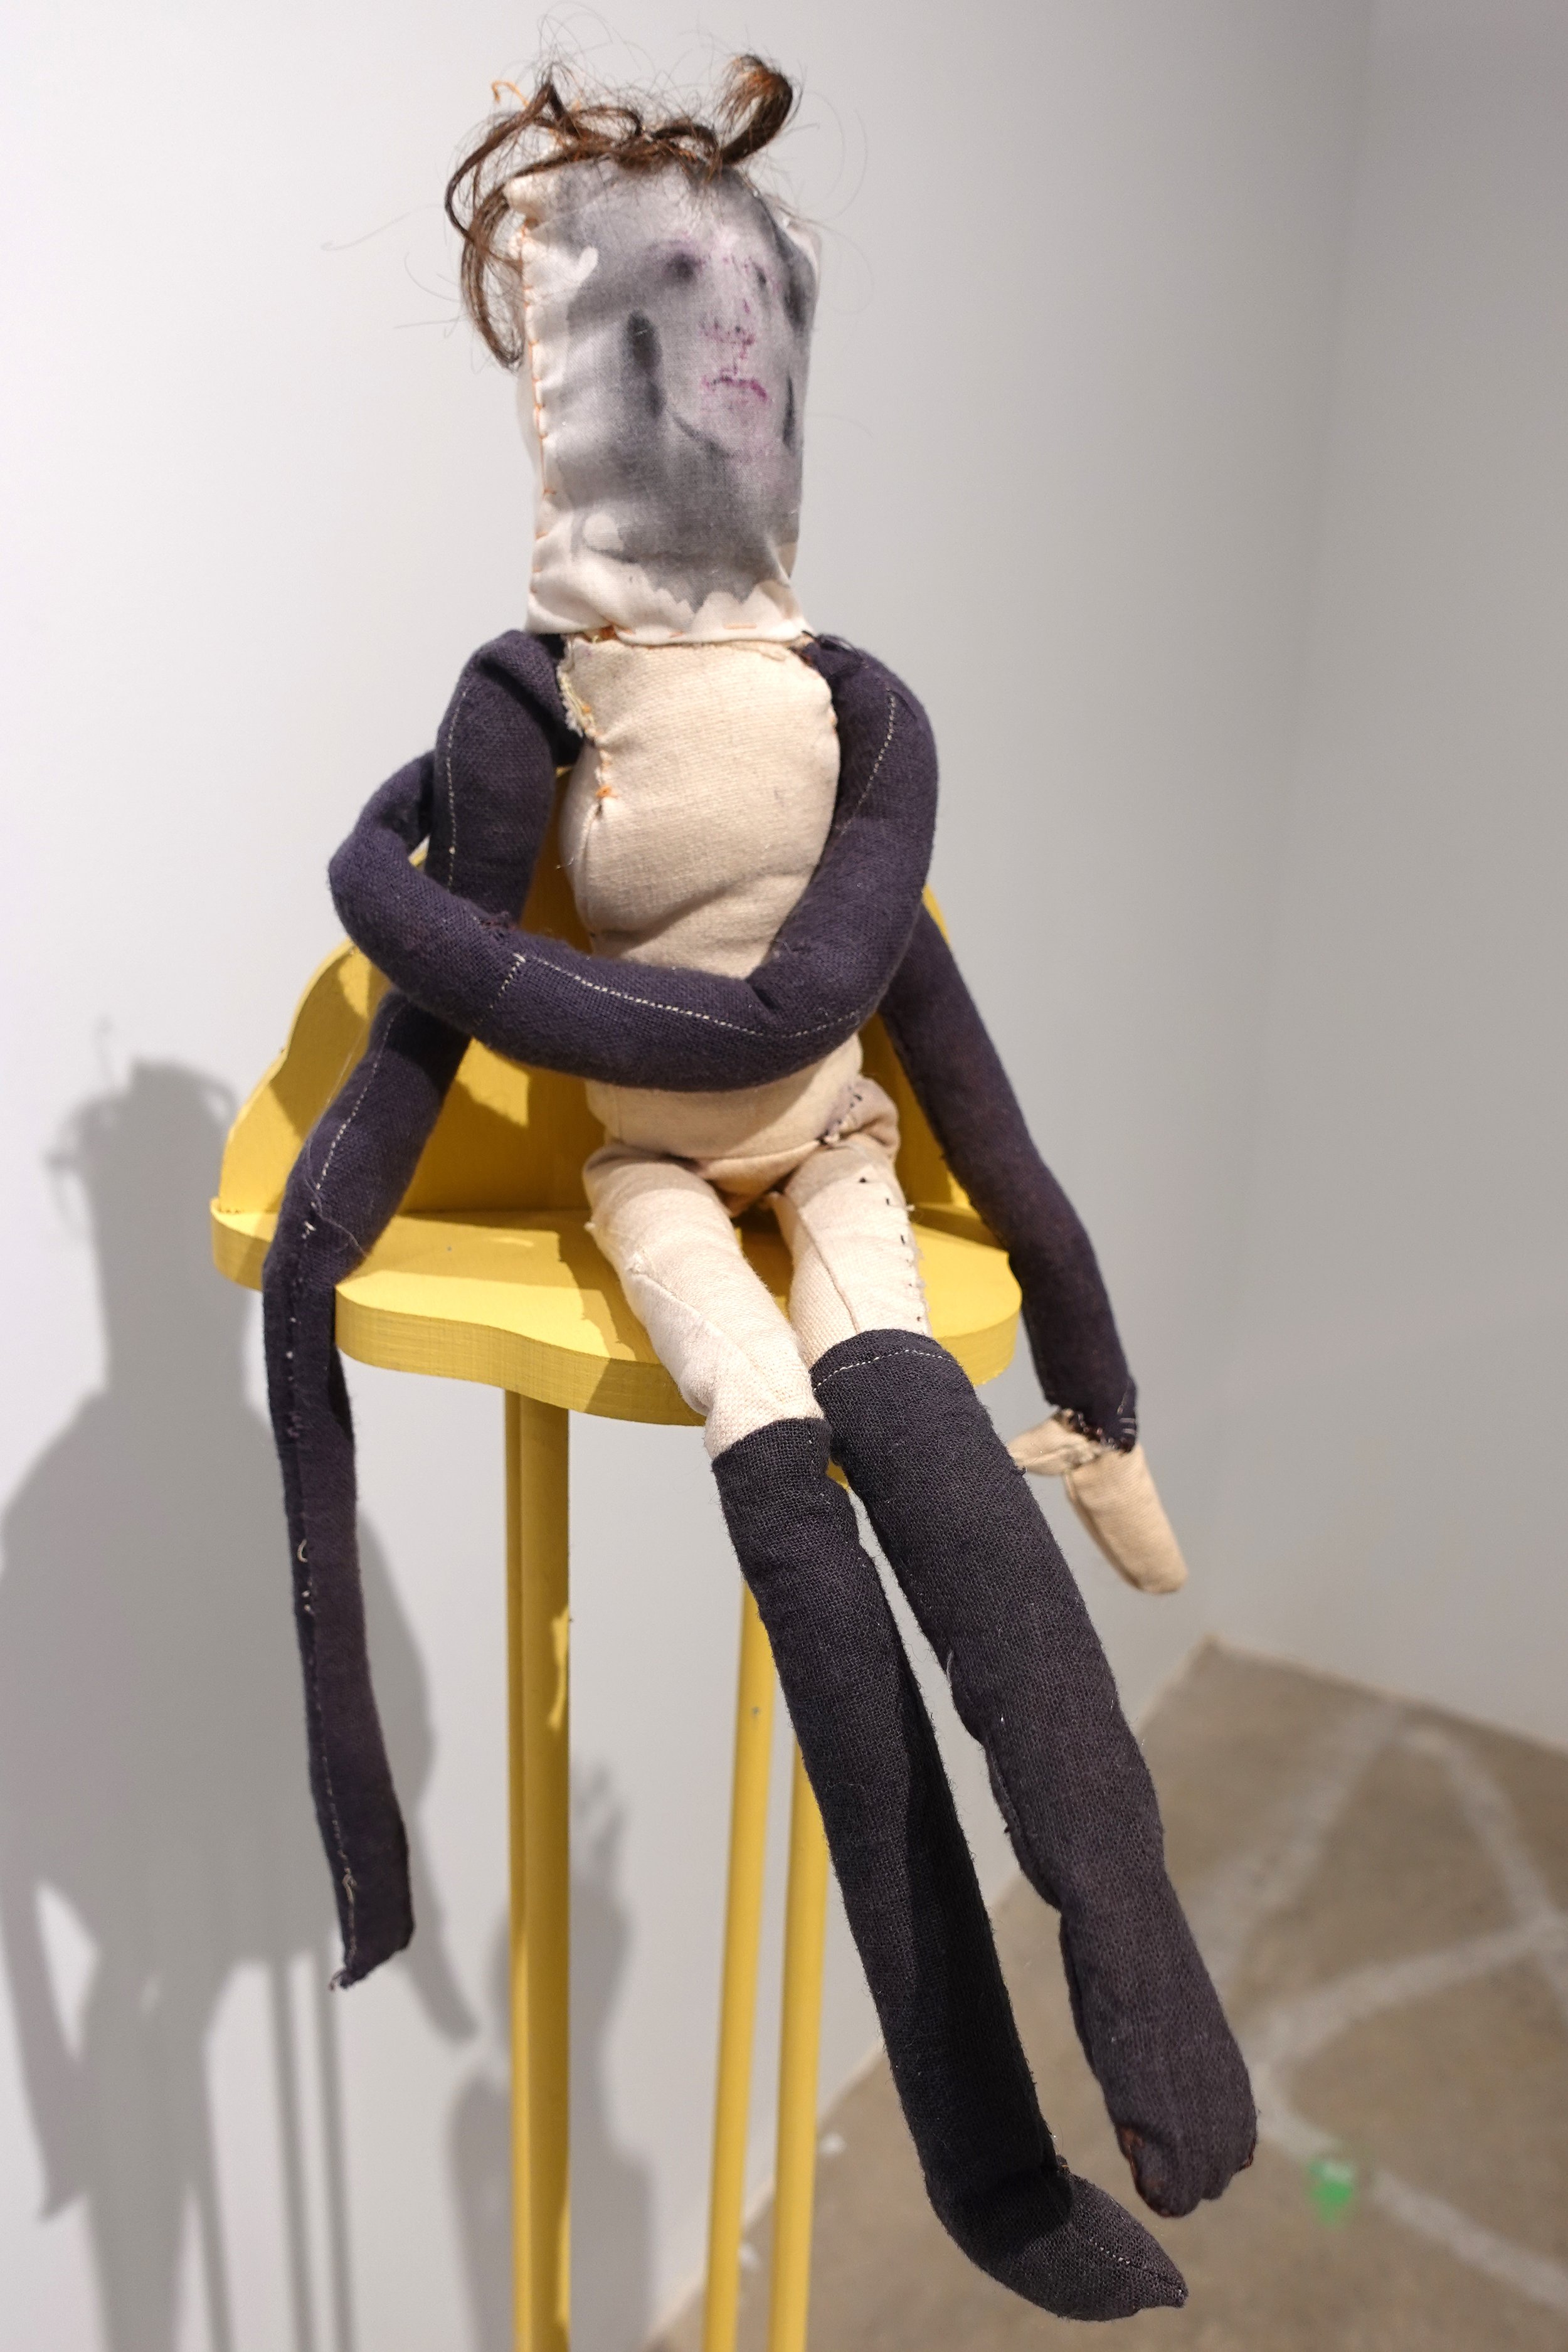   Spirit of Spectral Self  wood, linen, fibers, hair, polyester, ink; 40.625 x 6.375  inches 